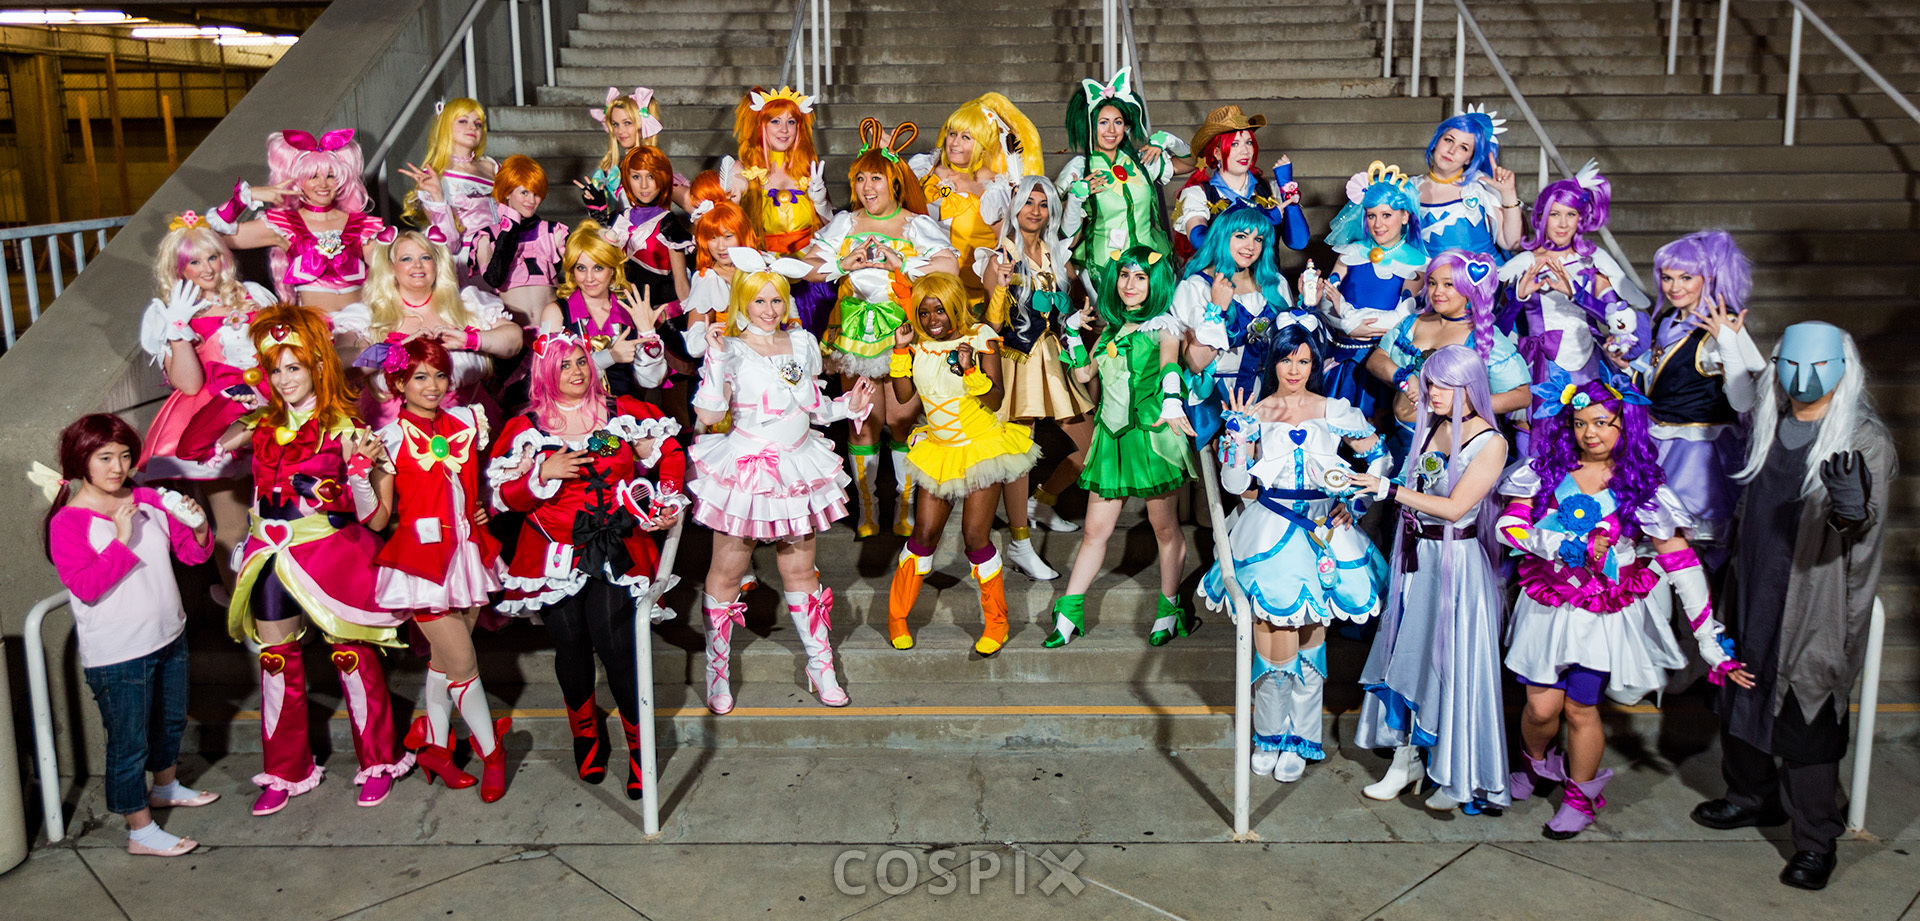 Cospix.net photo featuring Sparkle Pipsi and NyuNyu Cosplay